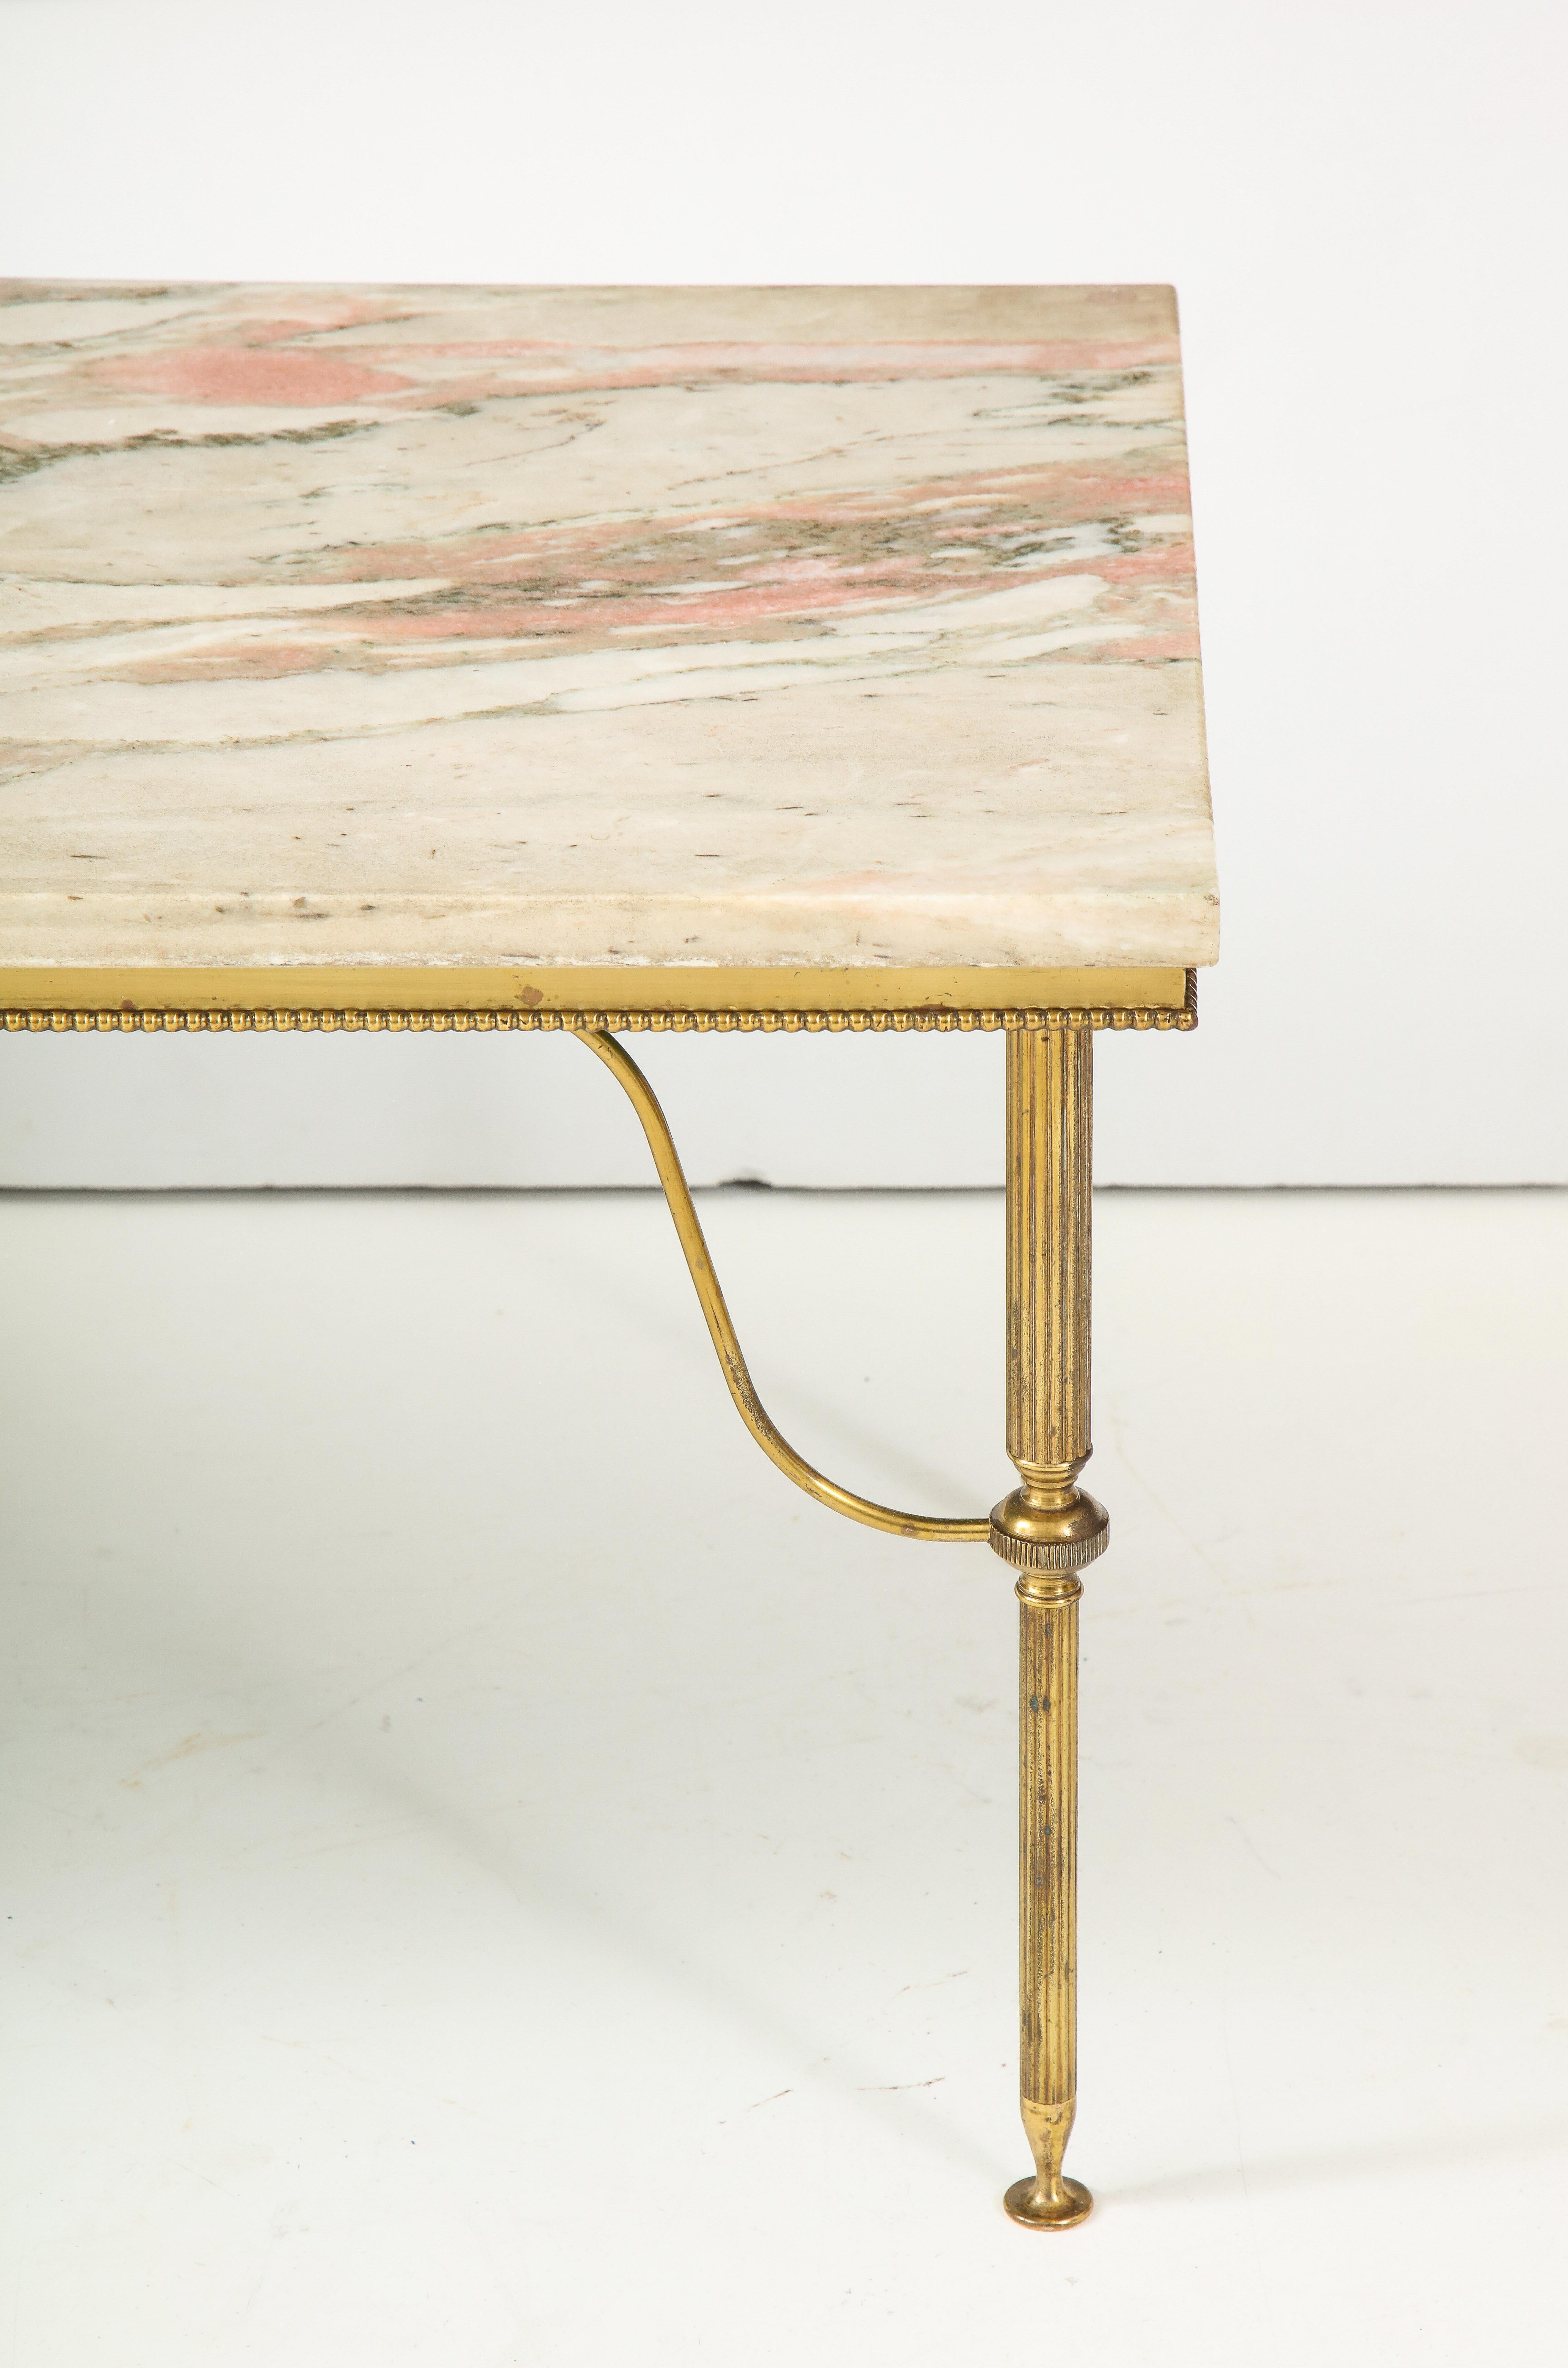 Early 20th century pink marble cocktail table. Beautifully simple brass base with claw feet. Marble is inset and removable for transport with holes to align marble properly on the piece, very rare detail for this era.